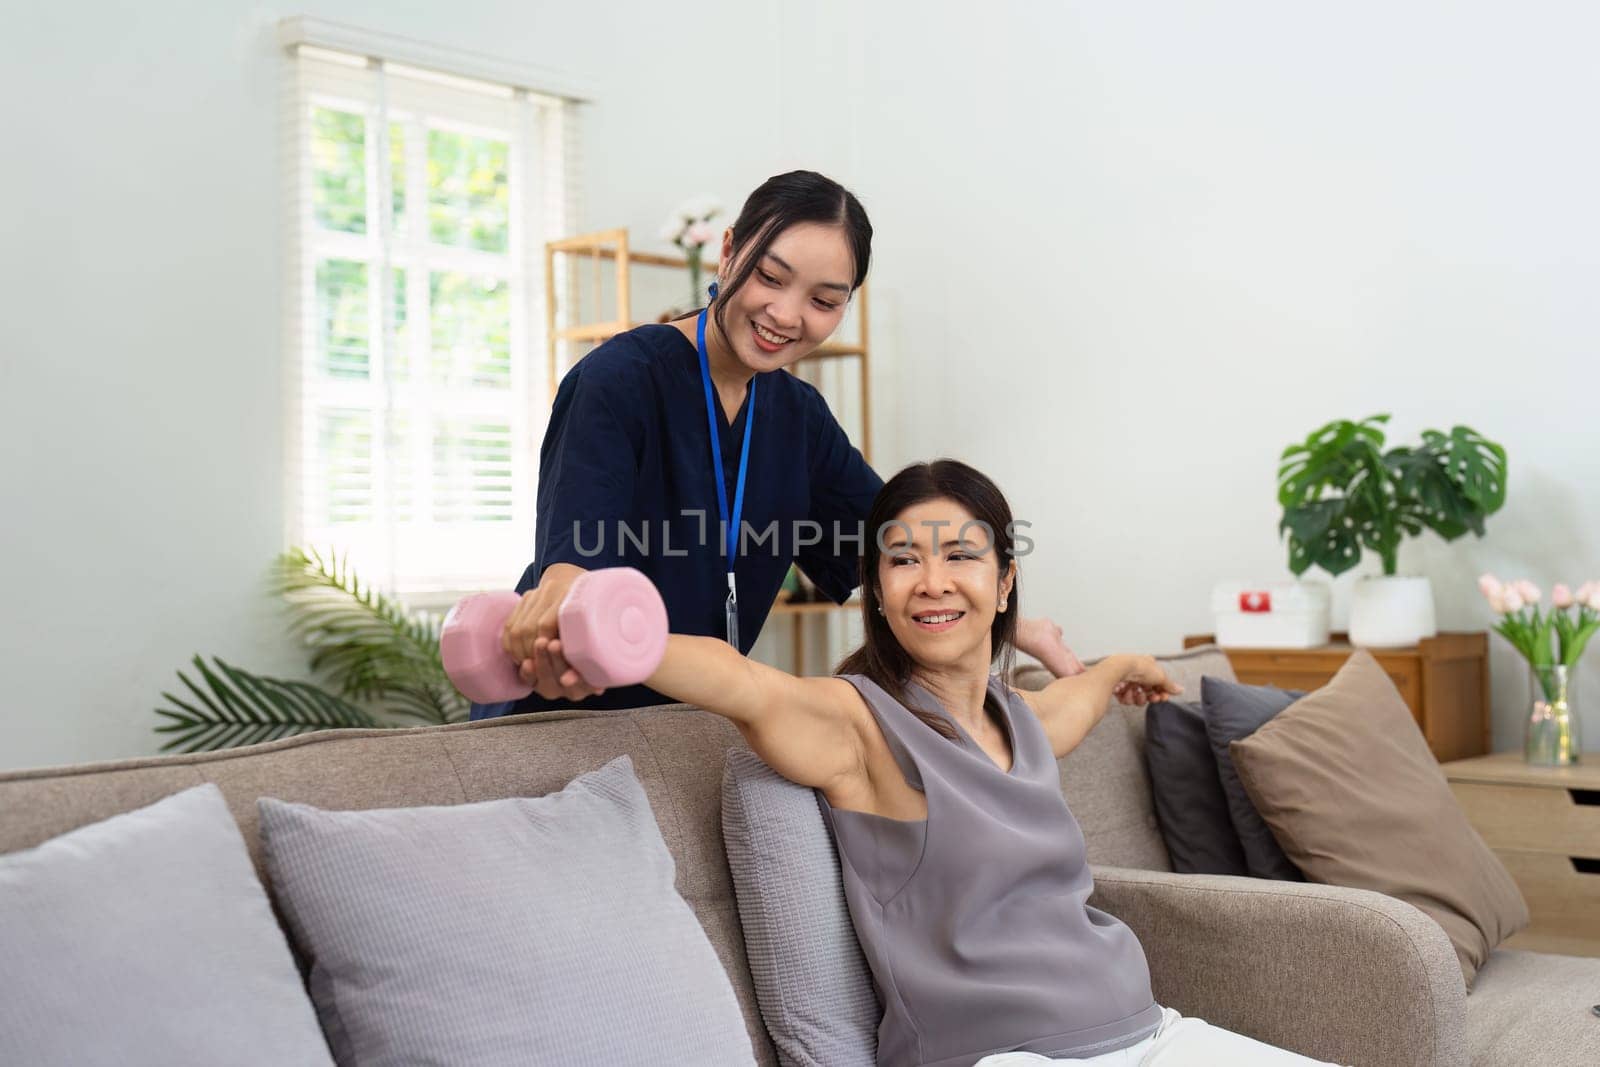 Asian older aged woman doing physiotherapist with support from nurse. Therapist assisting senior woman with exercises in nursing home.